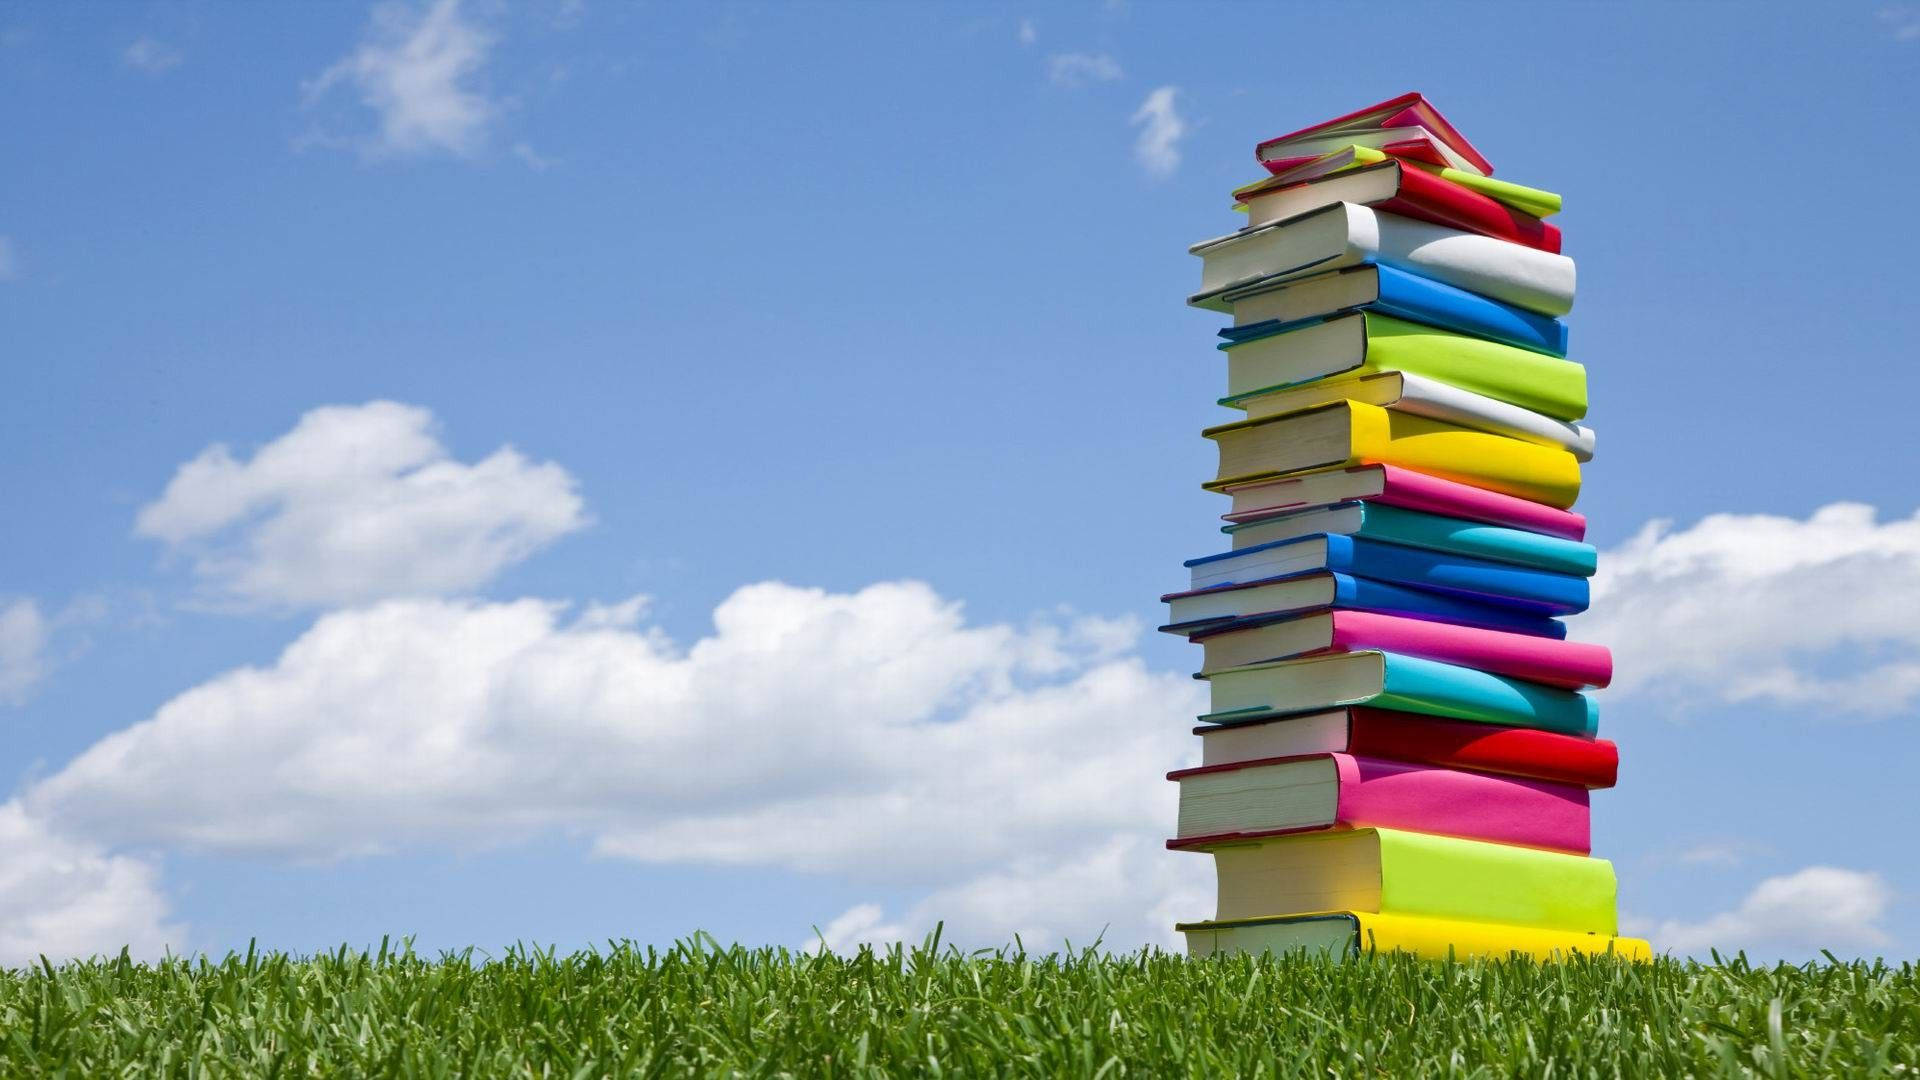 Colorful Book Stack Outside